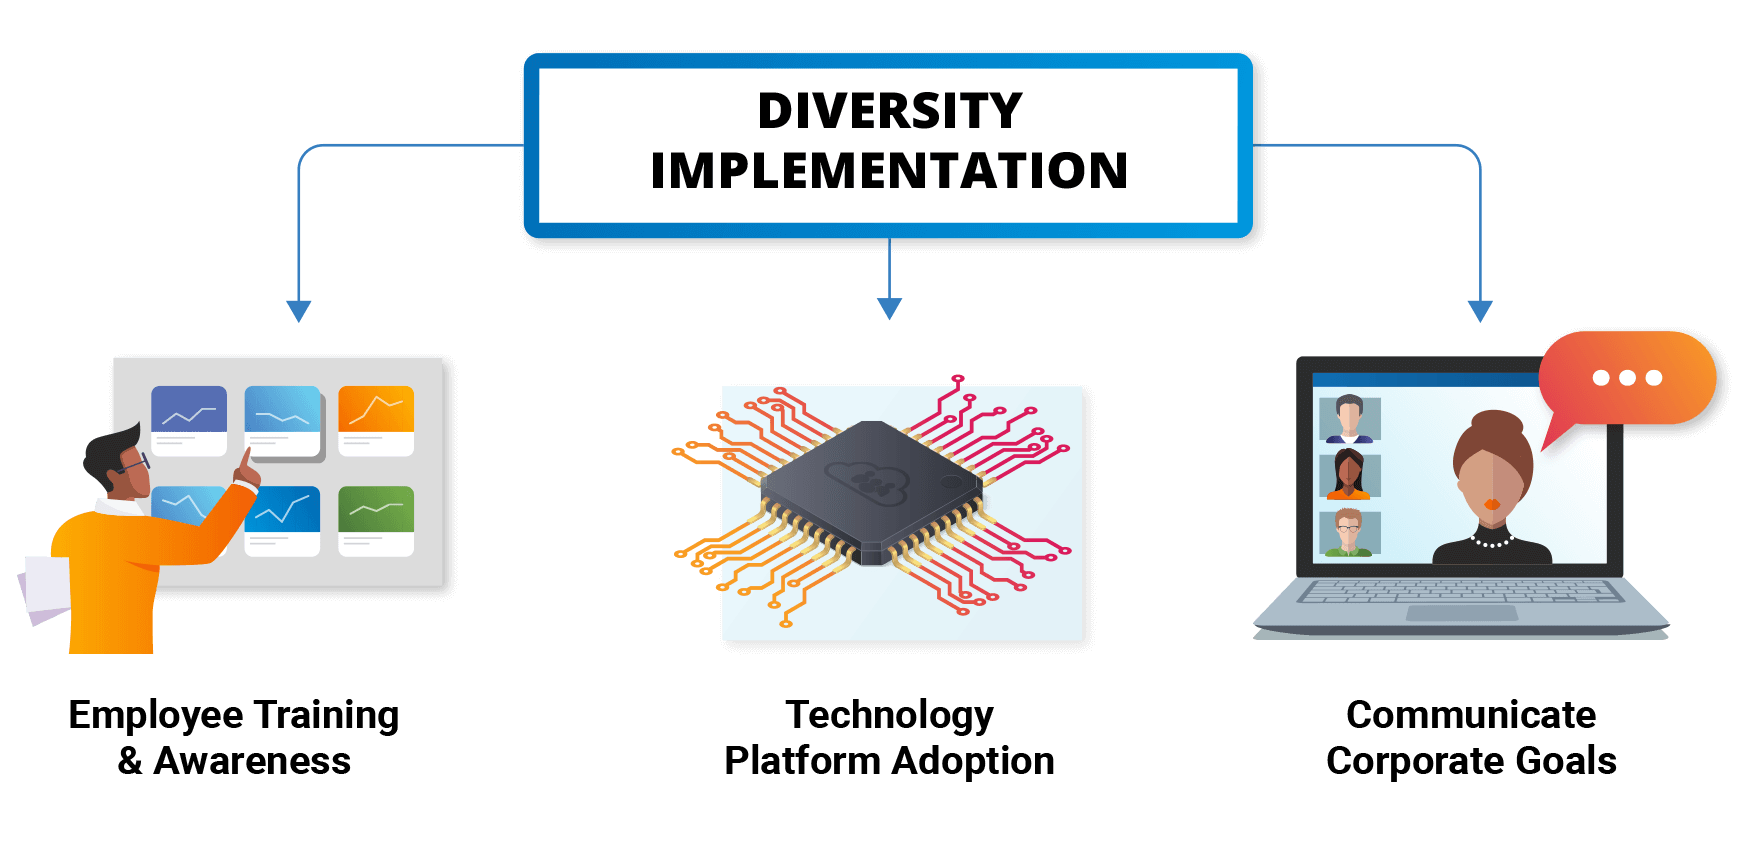 Implement the Plan to Improve Diversity